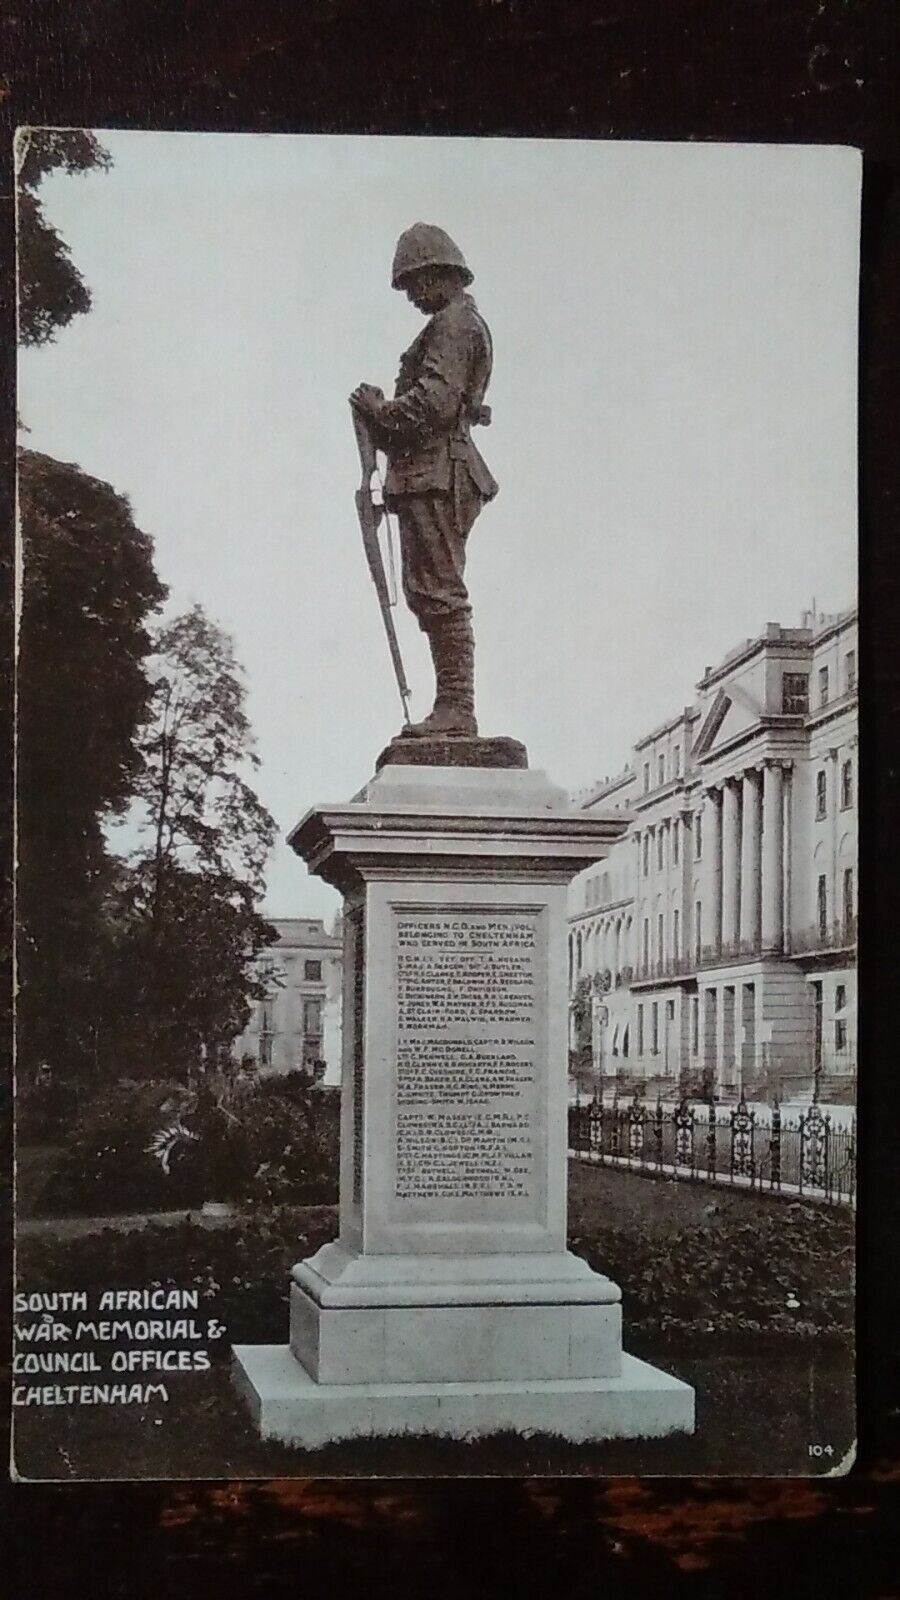 South African War Memorial & Council Offices, Cheltenham, ENG - Early-Mid 1900s